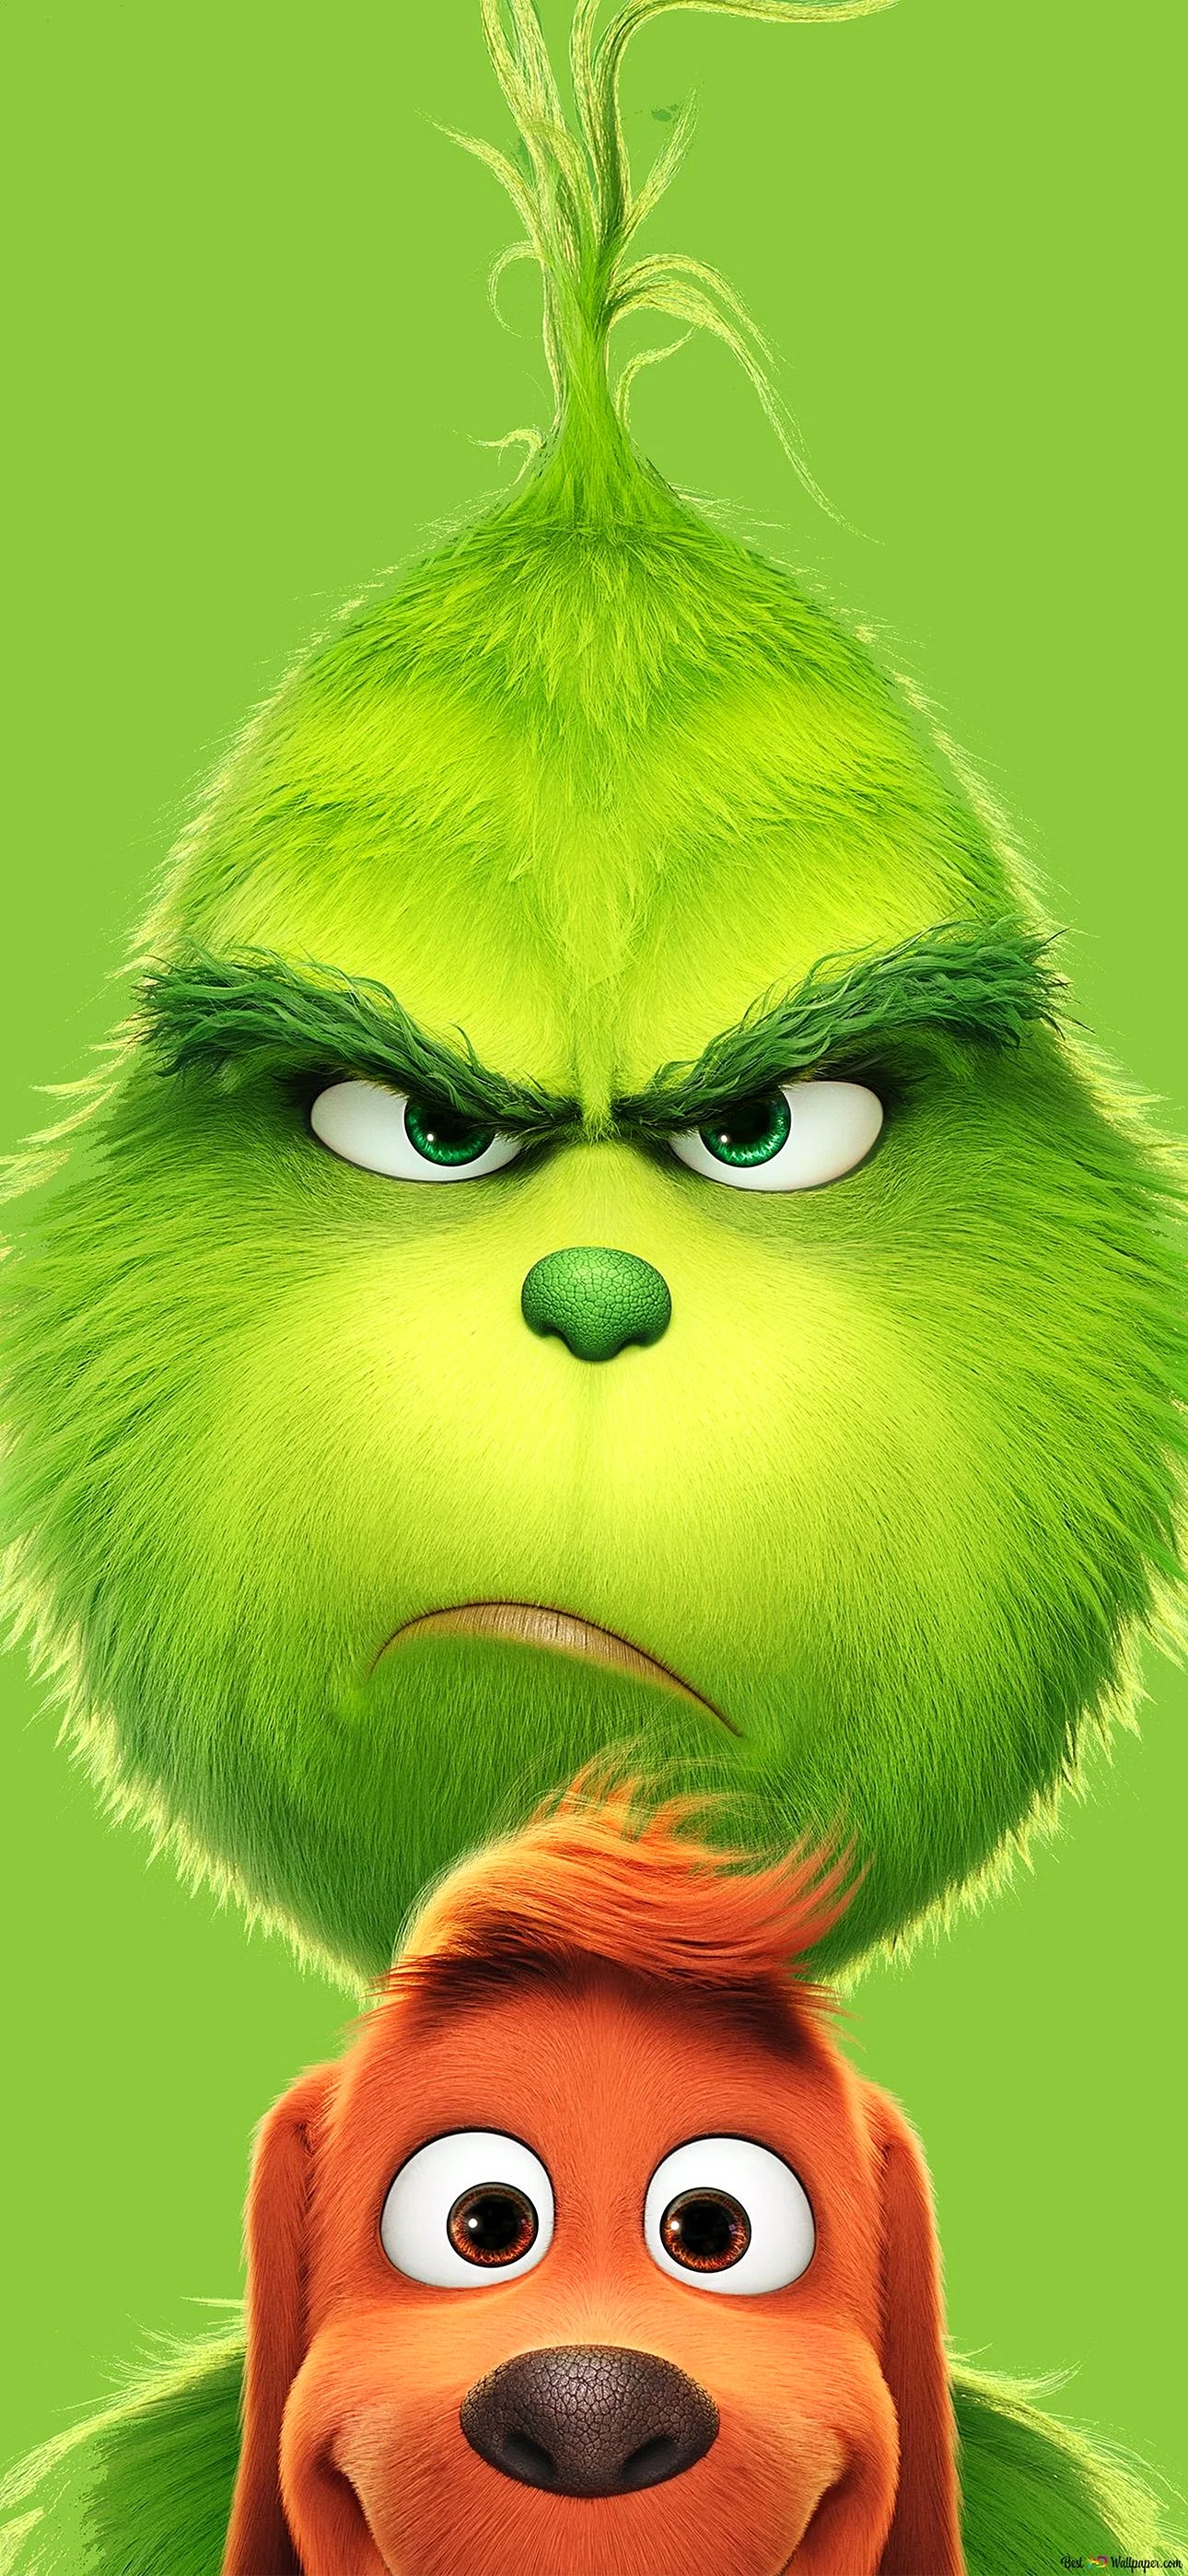 The Grinch 2018 Wallpaper for iPhone 14 Pro Max